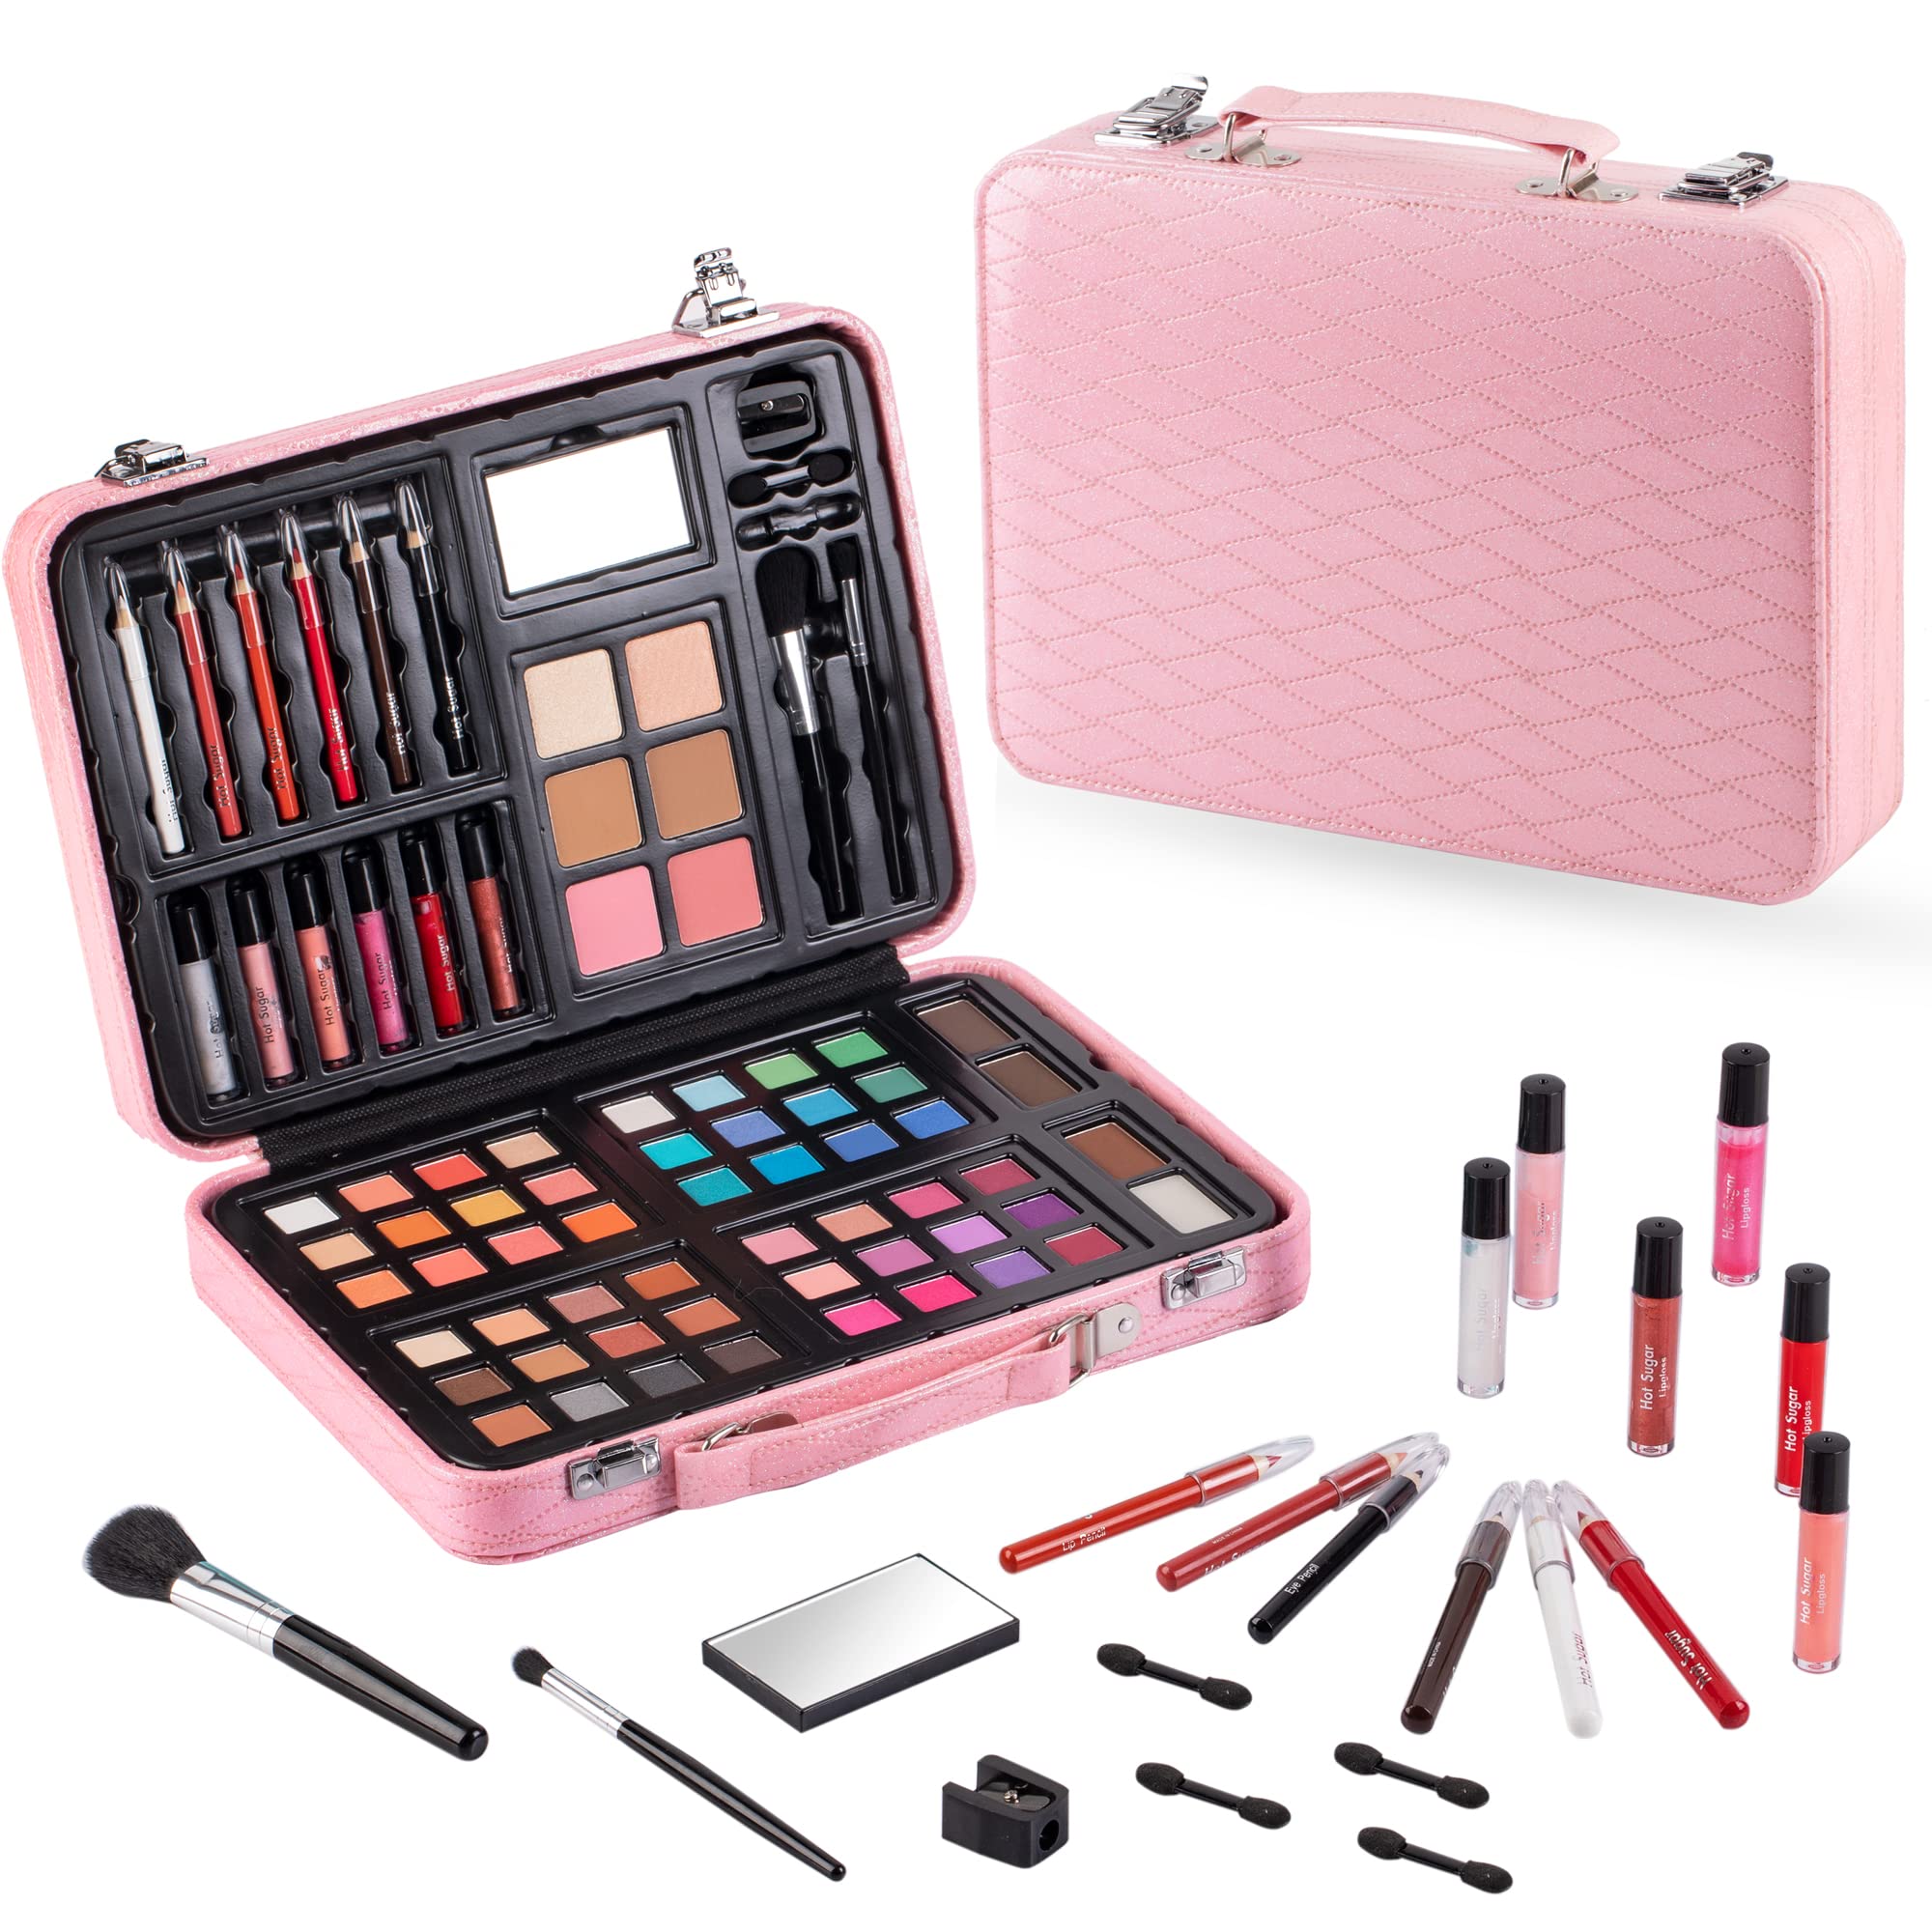 Buy Hot Sugar Makeup Kit for Preteen Girls 10-12, Birthday Christmas Makeup Gift  Set for Teens 16-18, All in One Beginner Makeup Kit for Women Full Kit  Includes Real Cosmetics and Makeup